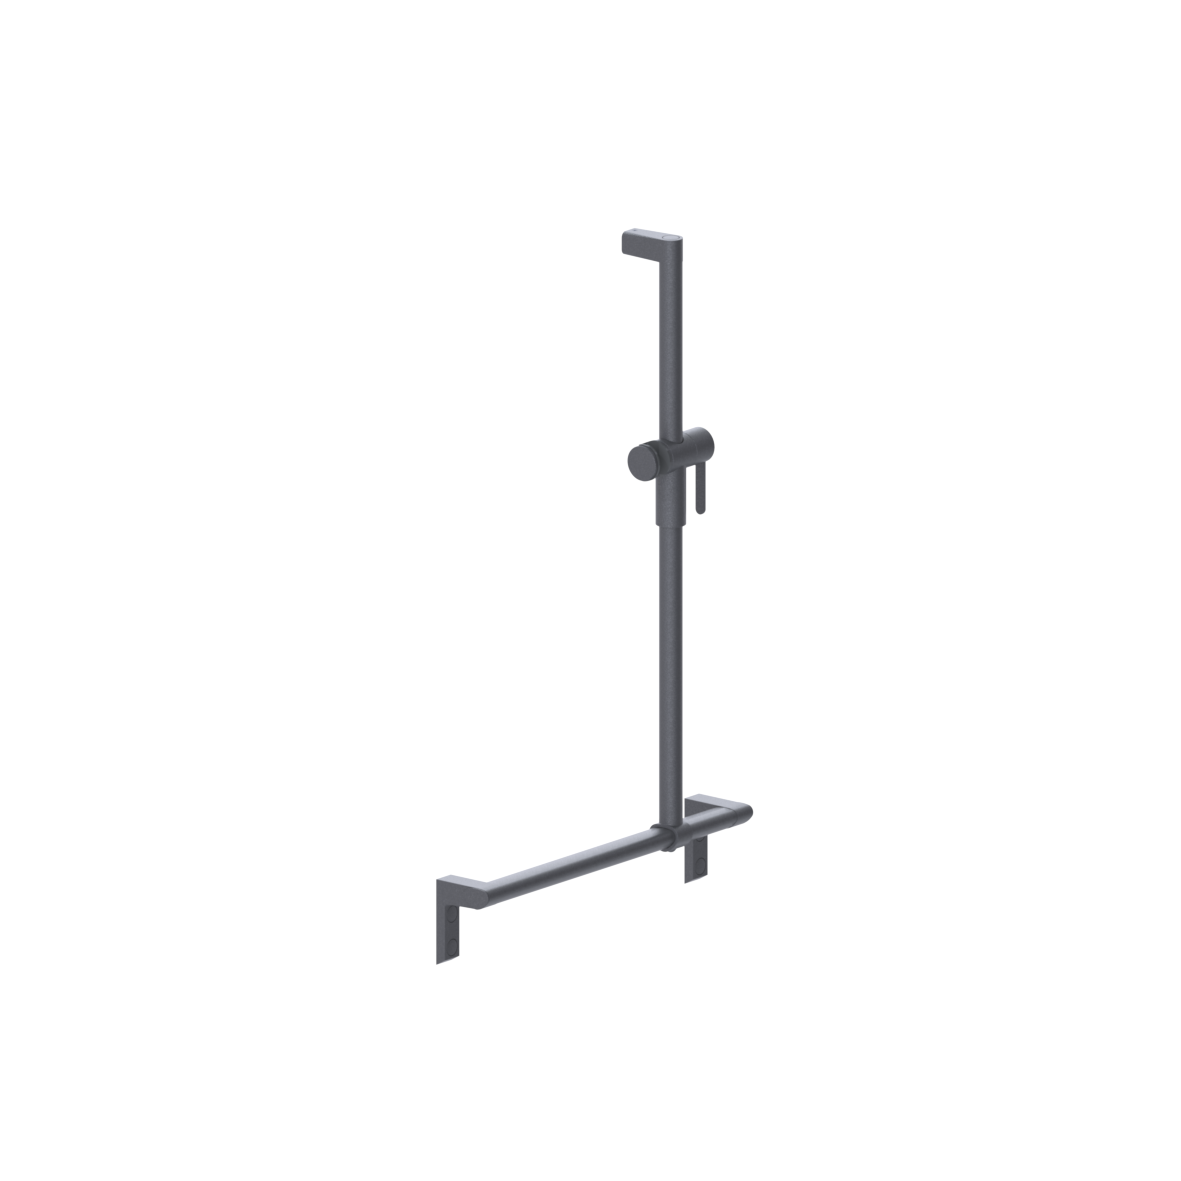 Cavere Care Shower handrail, with movable shower handrail, 500 x 750 mm, Cavere Metallic anthracite